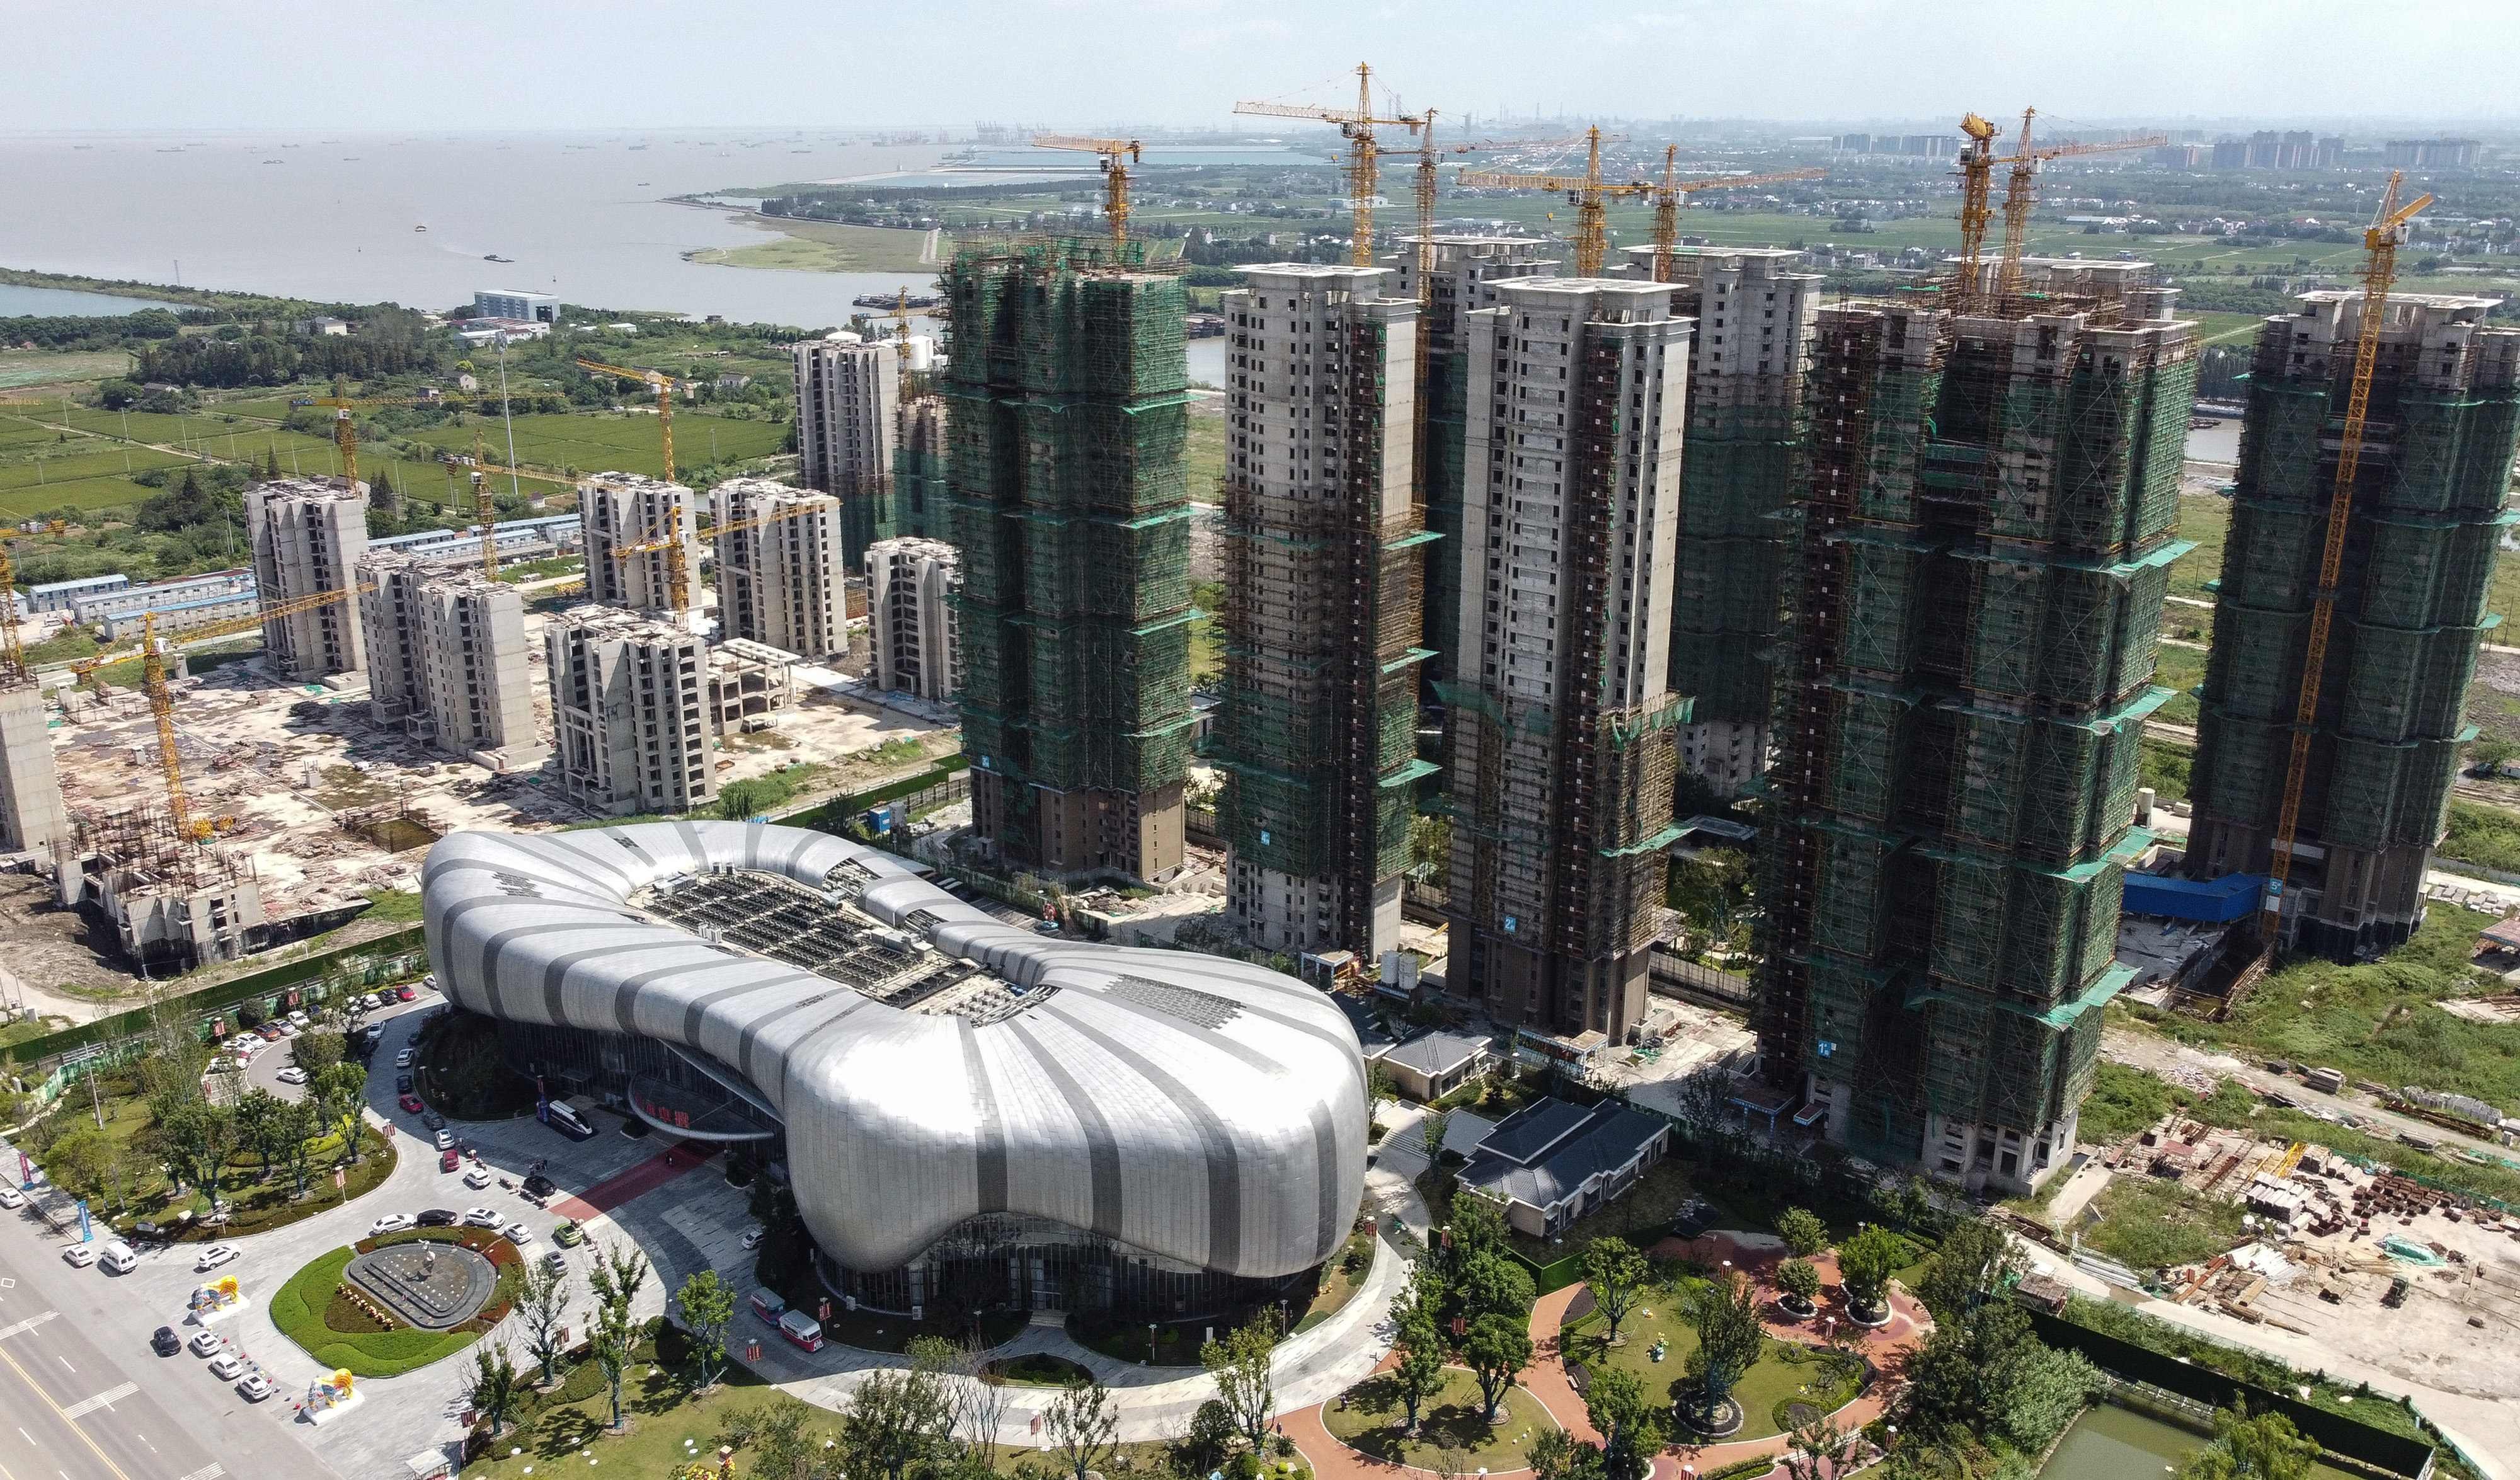 Construction has been halted at Evergrande Cultural Tourism City, a mixed-used residential-retail-entertainment development in Suzhou, eastern Jiangsu province, pictured on September 17. Photo: AFP